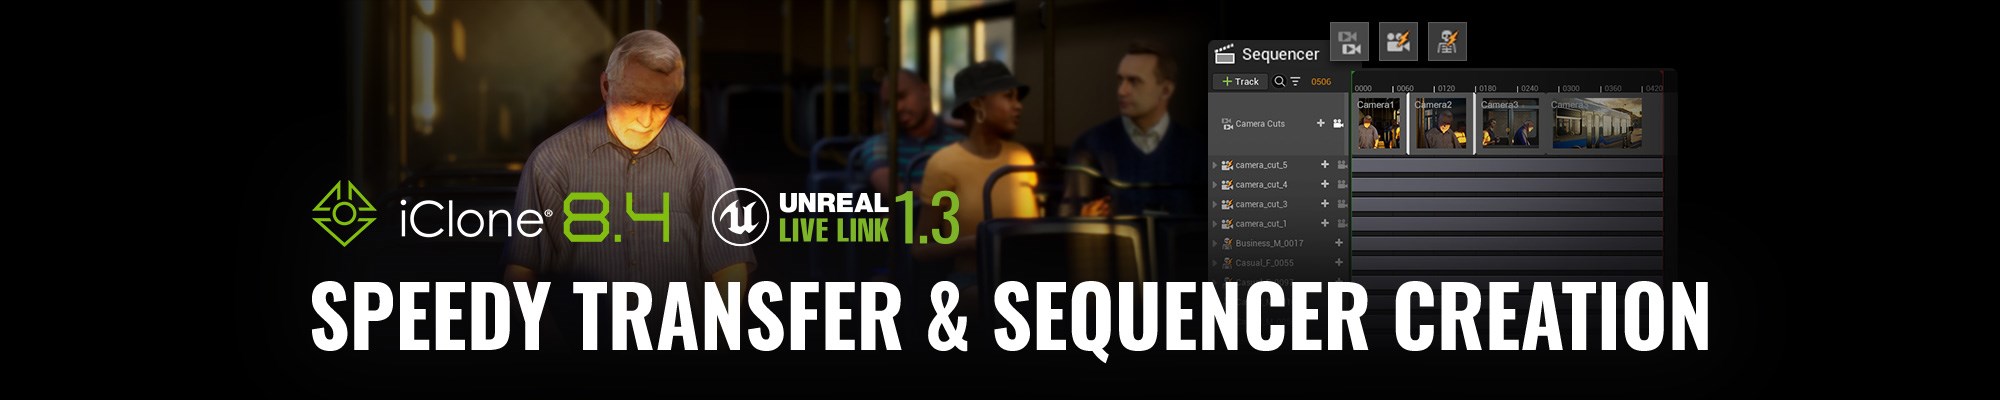 Unreal Live Link 1.3 - Speedy Transfer & Manageable Sequencer